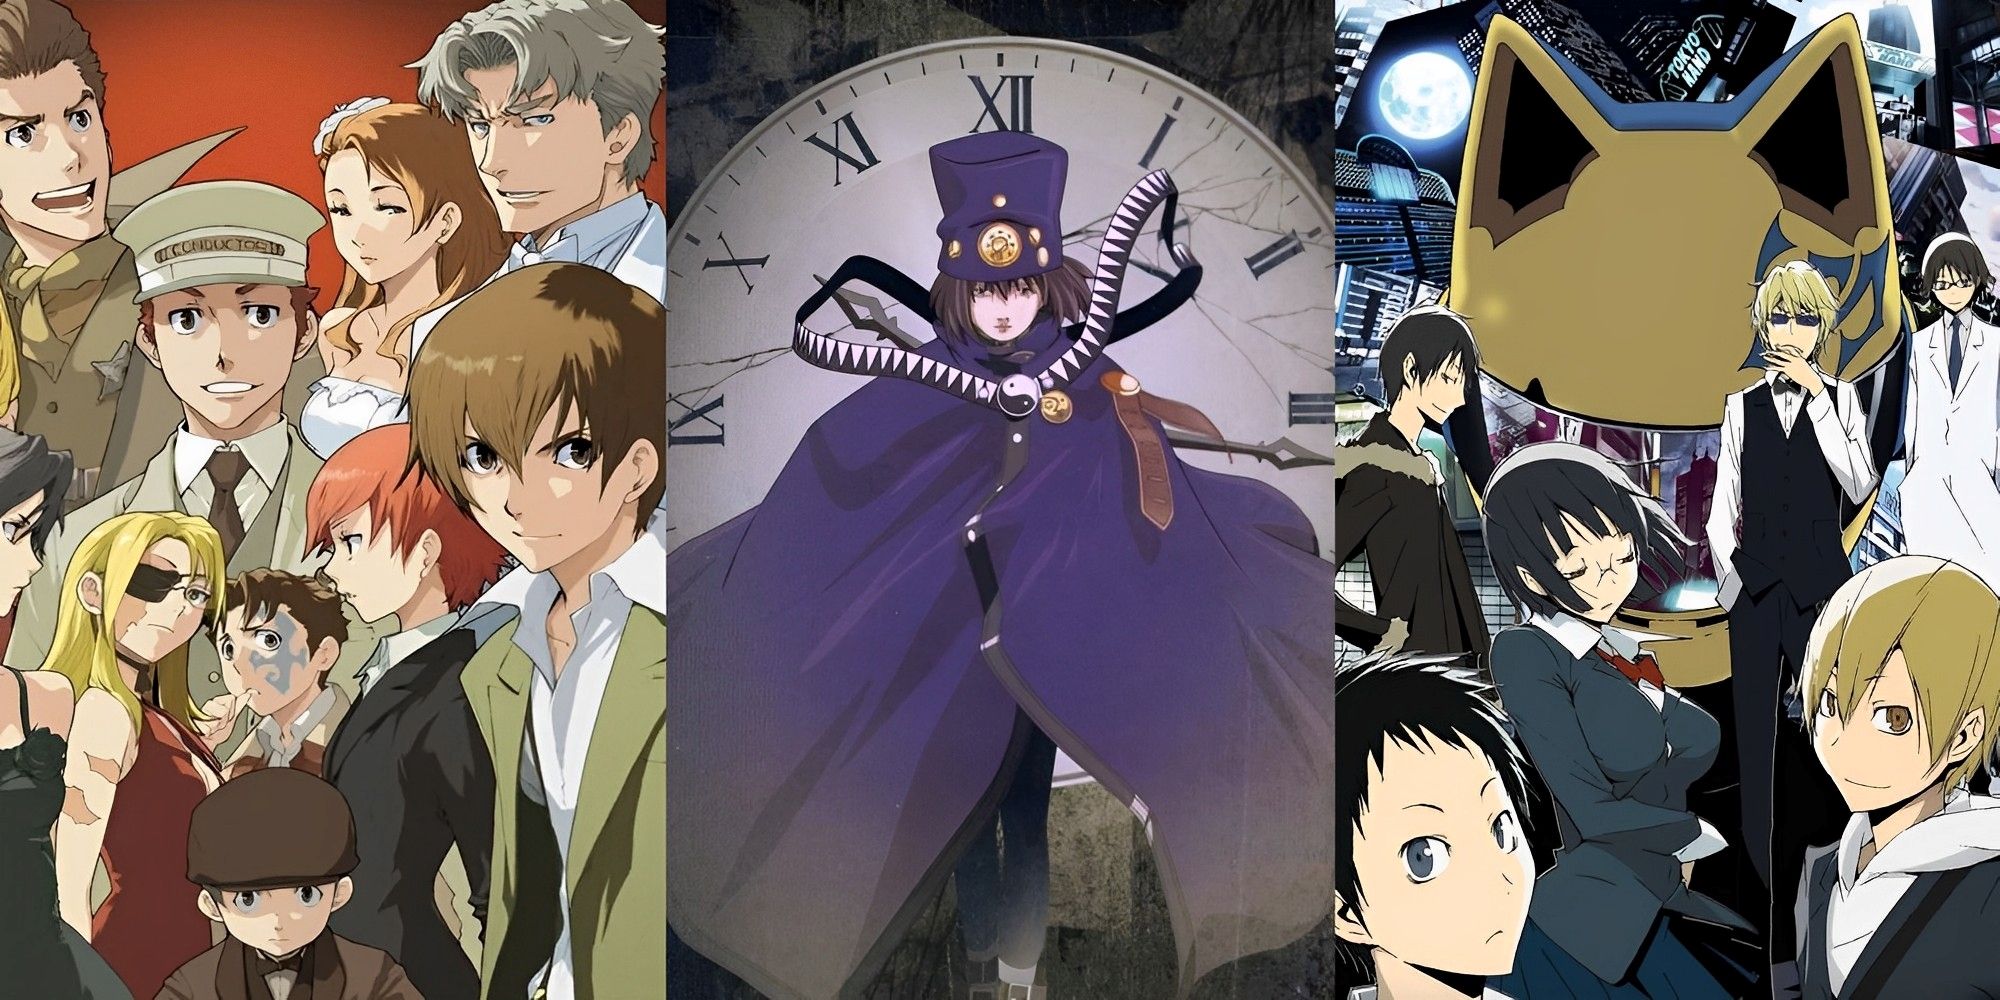 Characters from Baccano!, Boogiepop Phantom, and Durarara!! side by side